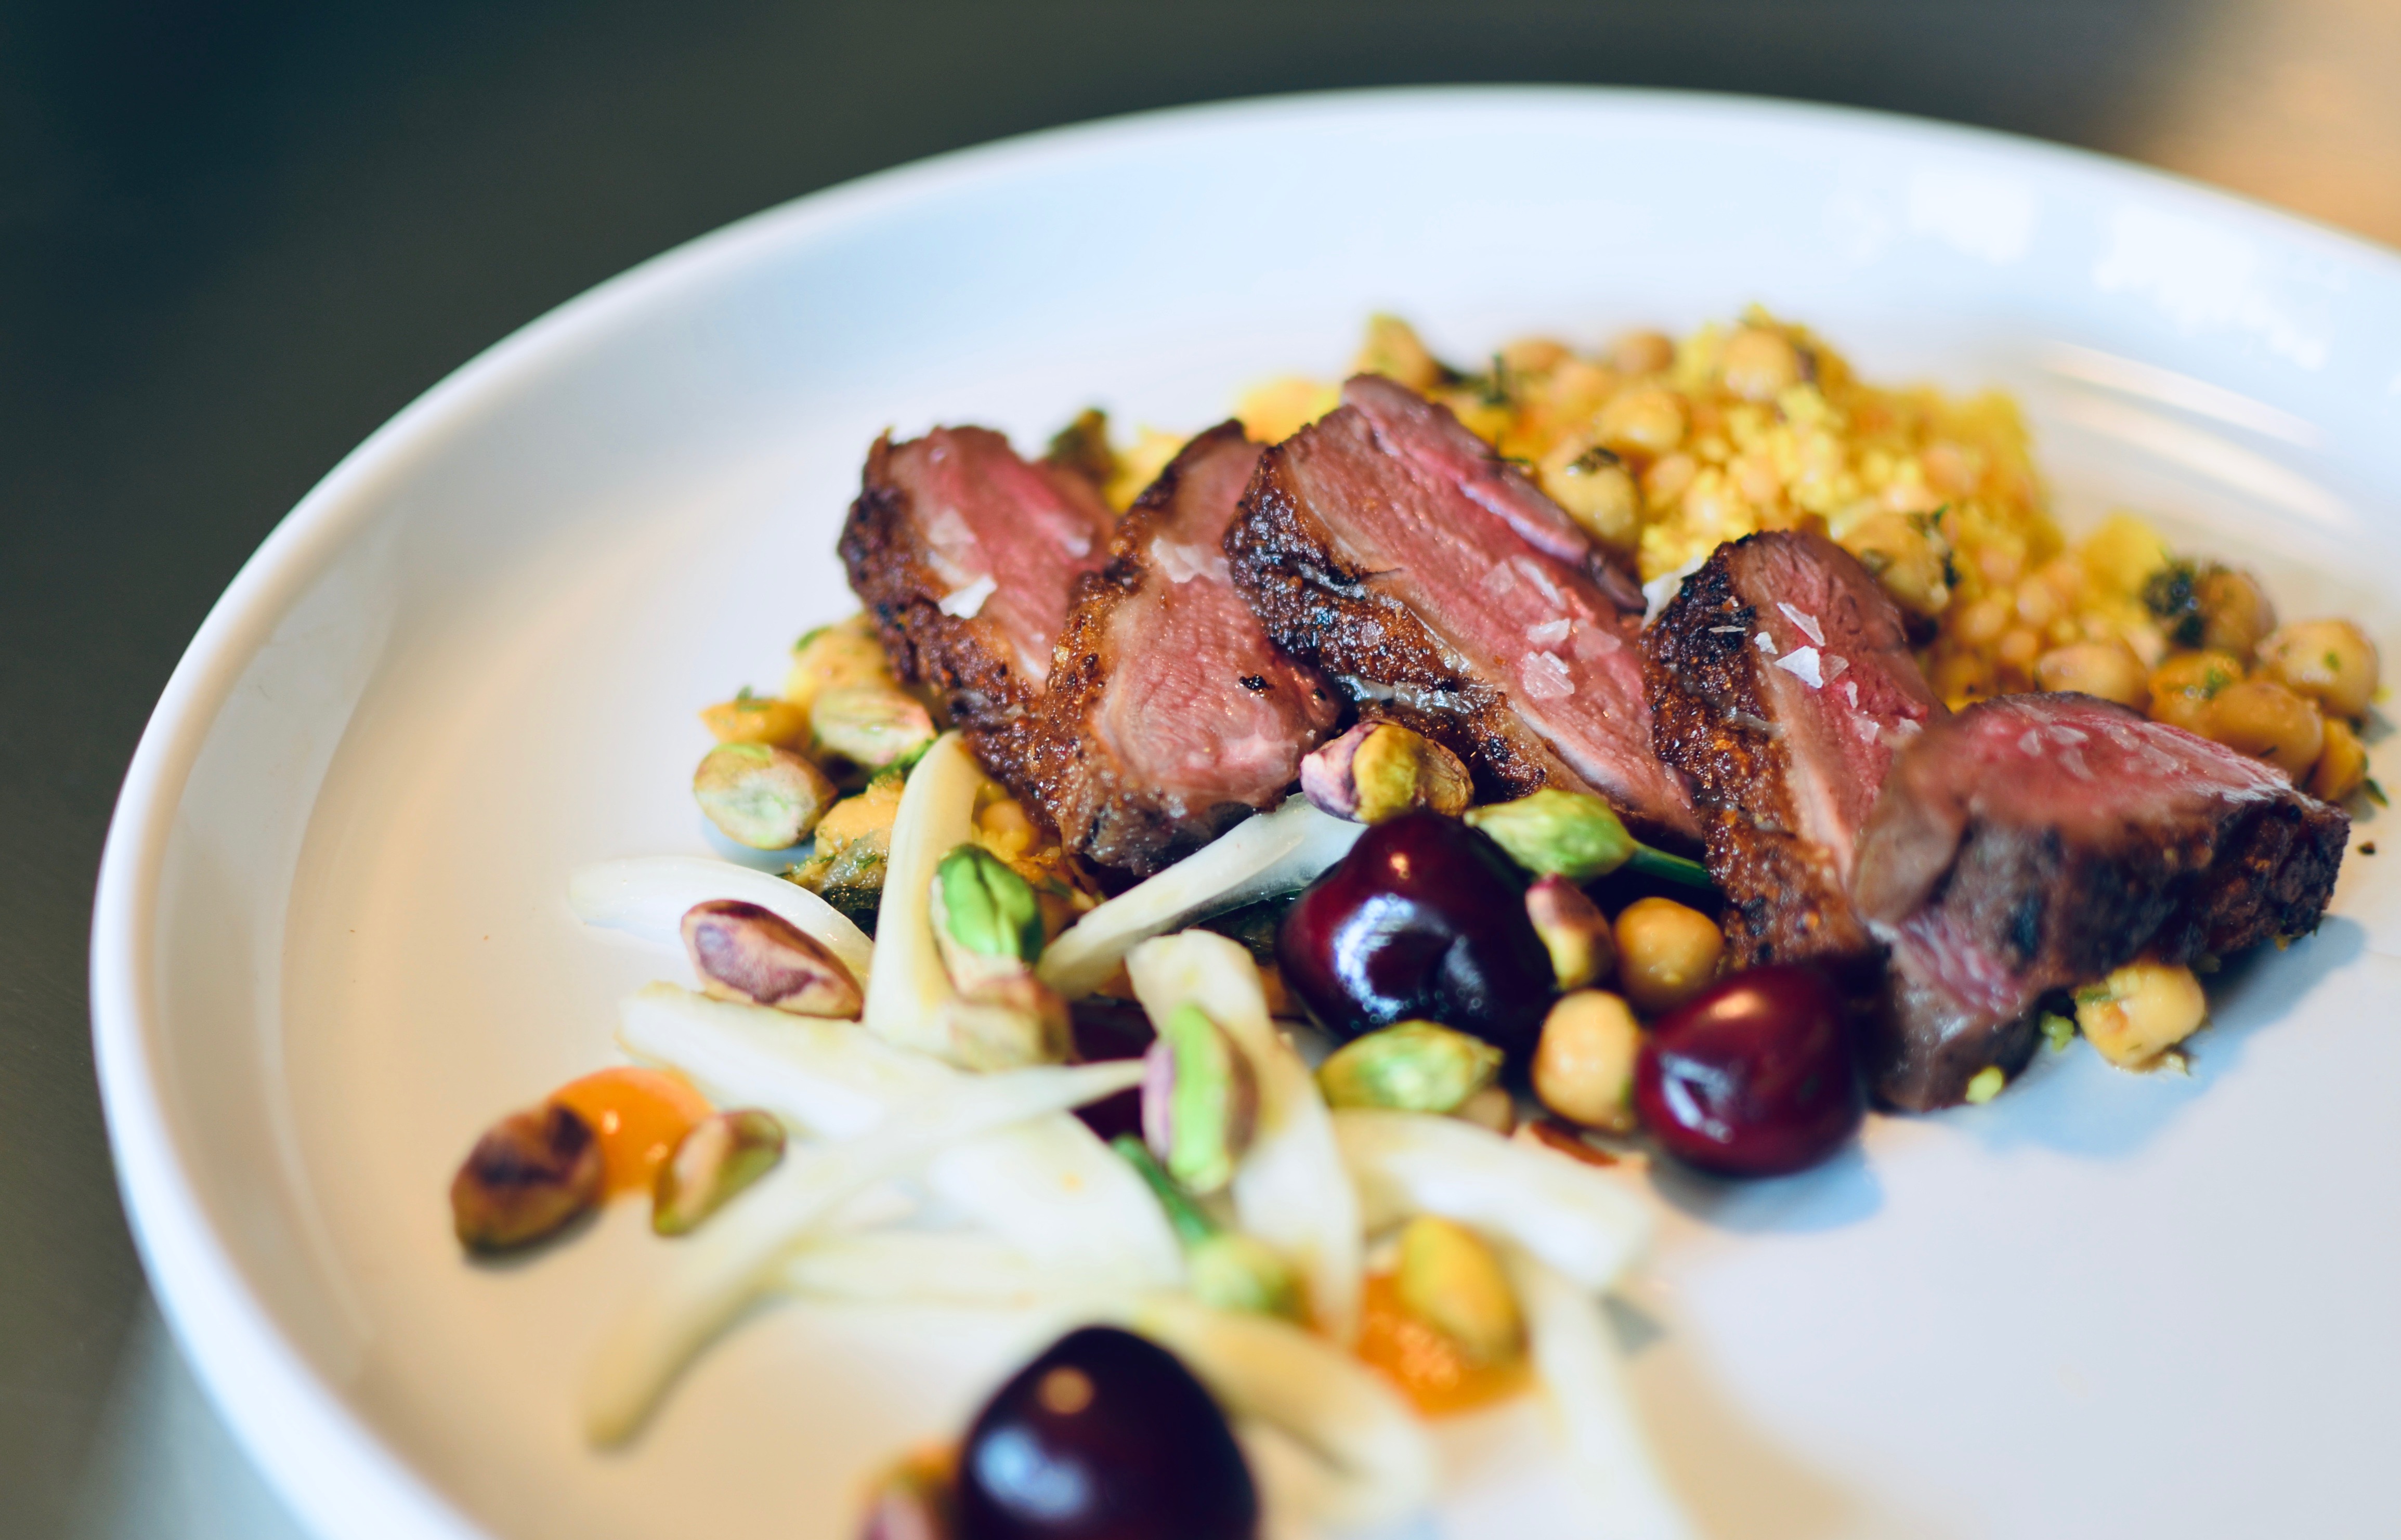 Plate of duck confit with Morrocan spiced couscous with fennel, cherries, and pistachios.